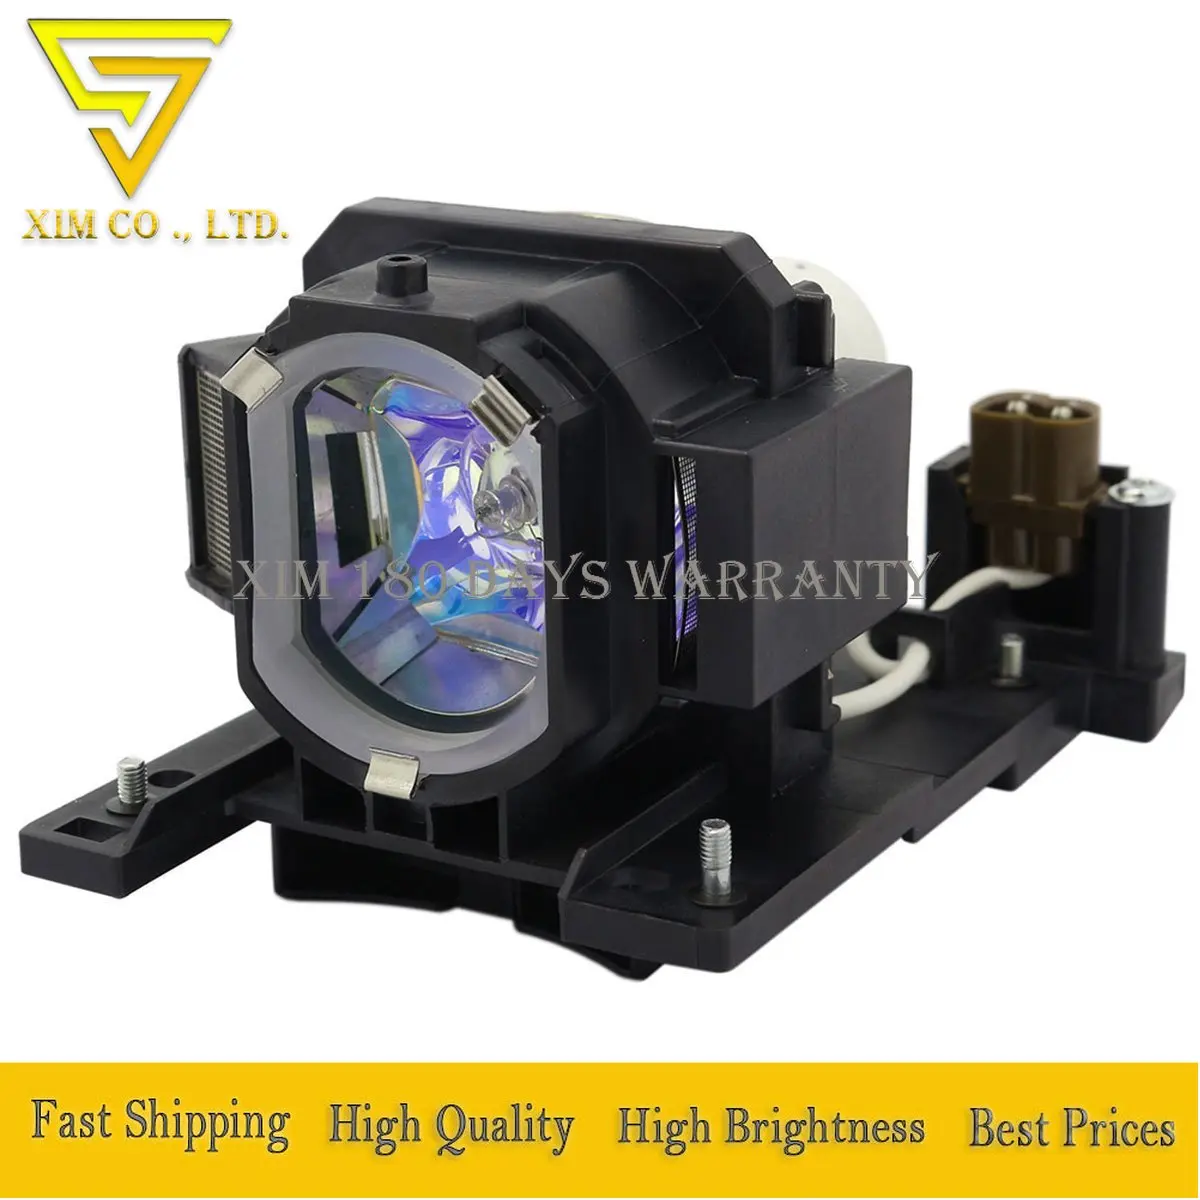 high quality DT01022 DT01026 Replacement Lamp with Housing for Hitachi CP-RX80W CP-RX78 ED-X24 CP-RX78W CP-RX80 projectors high quality dt01022 dt01026 replacement lamp with housing for hitachi cp rx80w cp rx78 ed x24 cp rx78w cp rx80 projectors